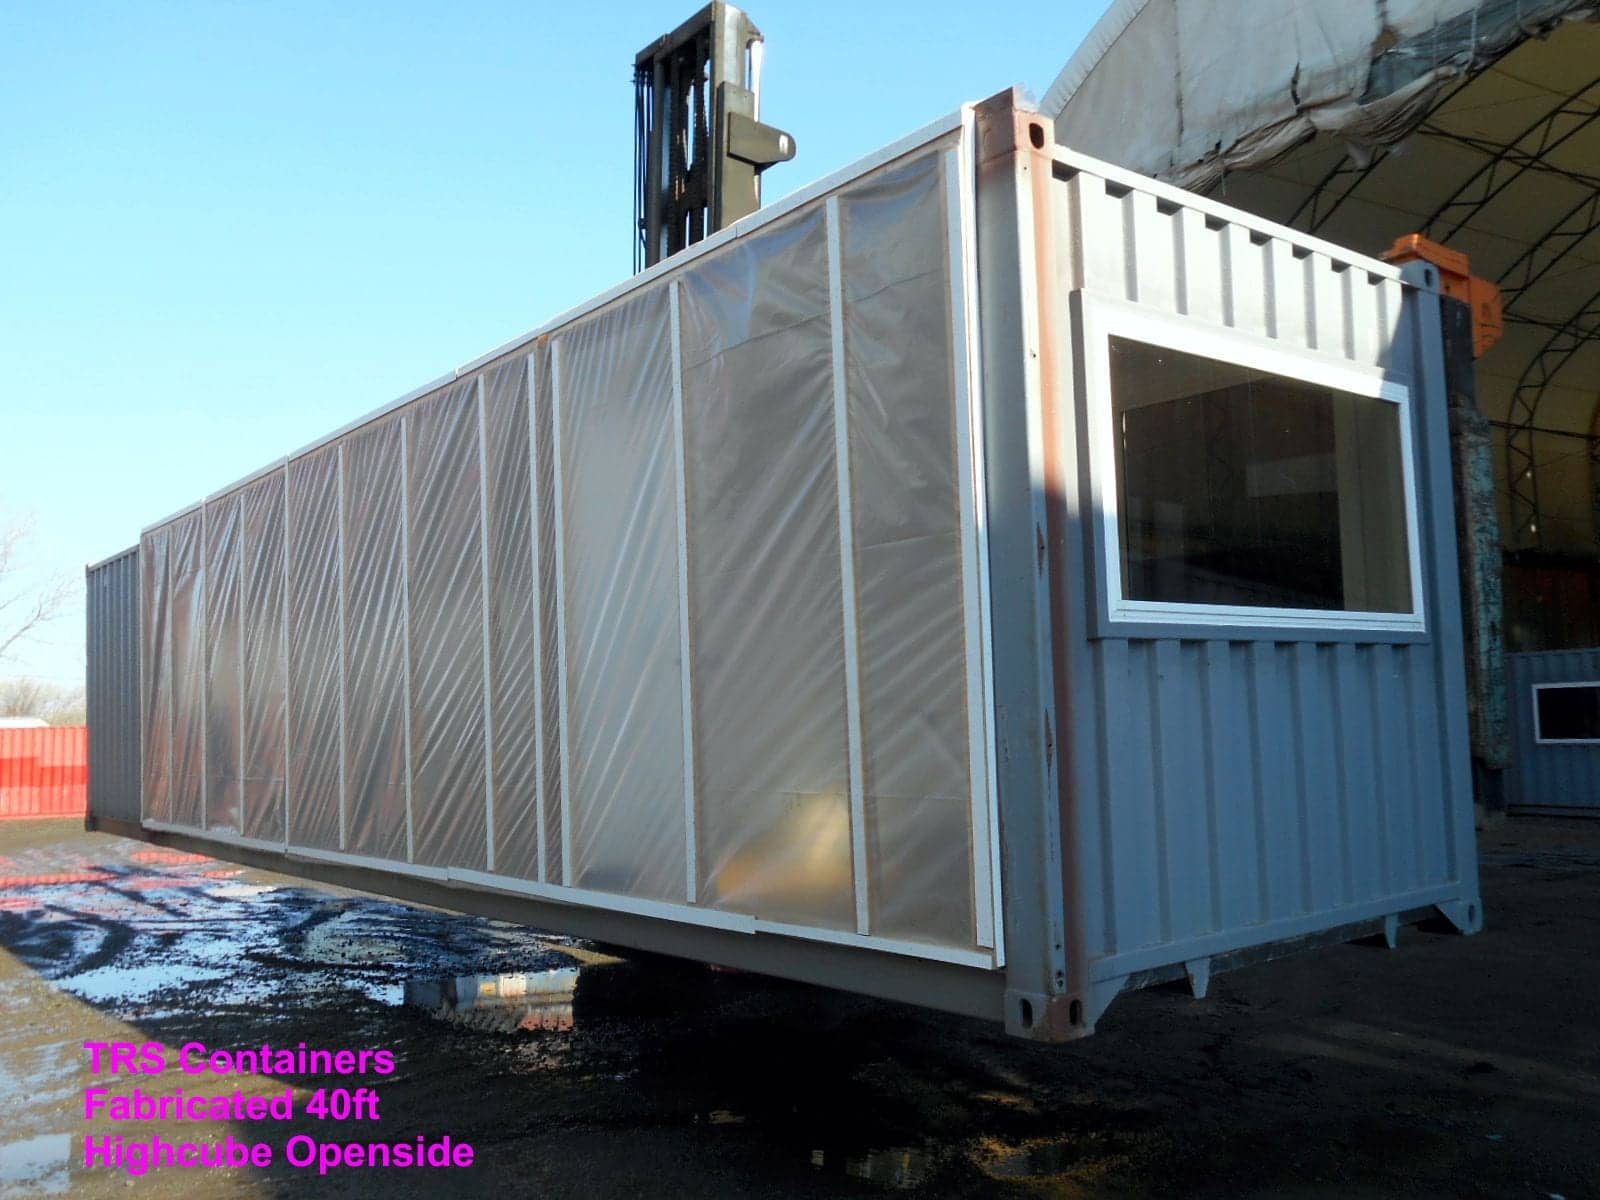 TRS Containsr performs fabrication work to convert 20 ft and 40 ft long containers into multi-functional structures